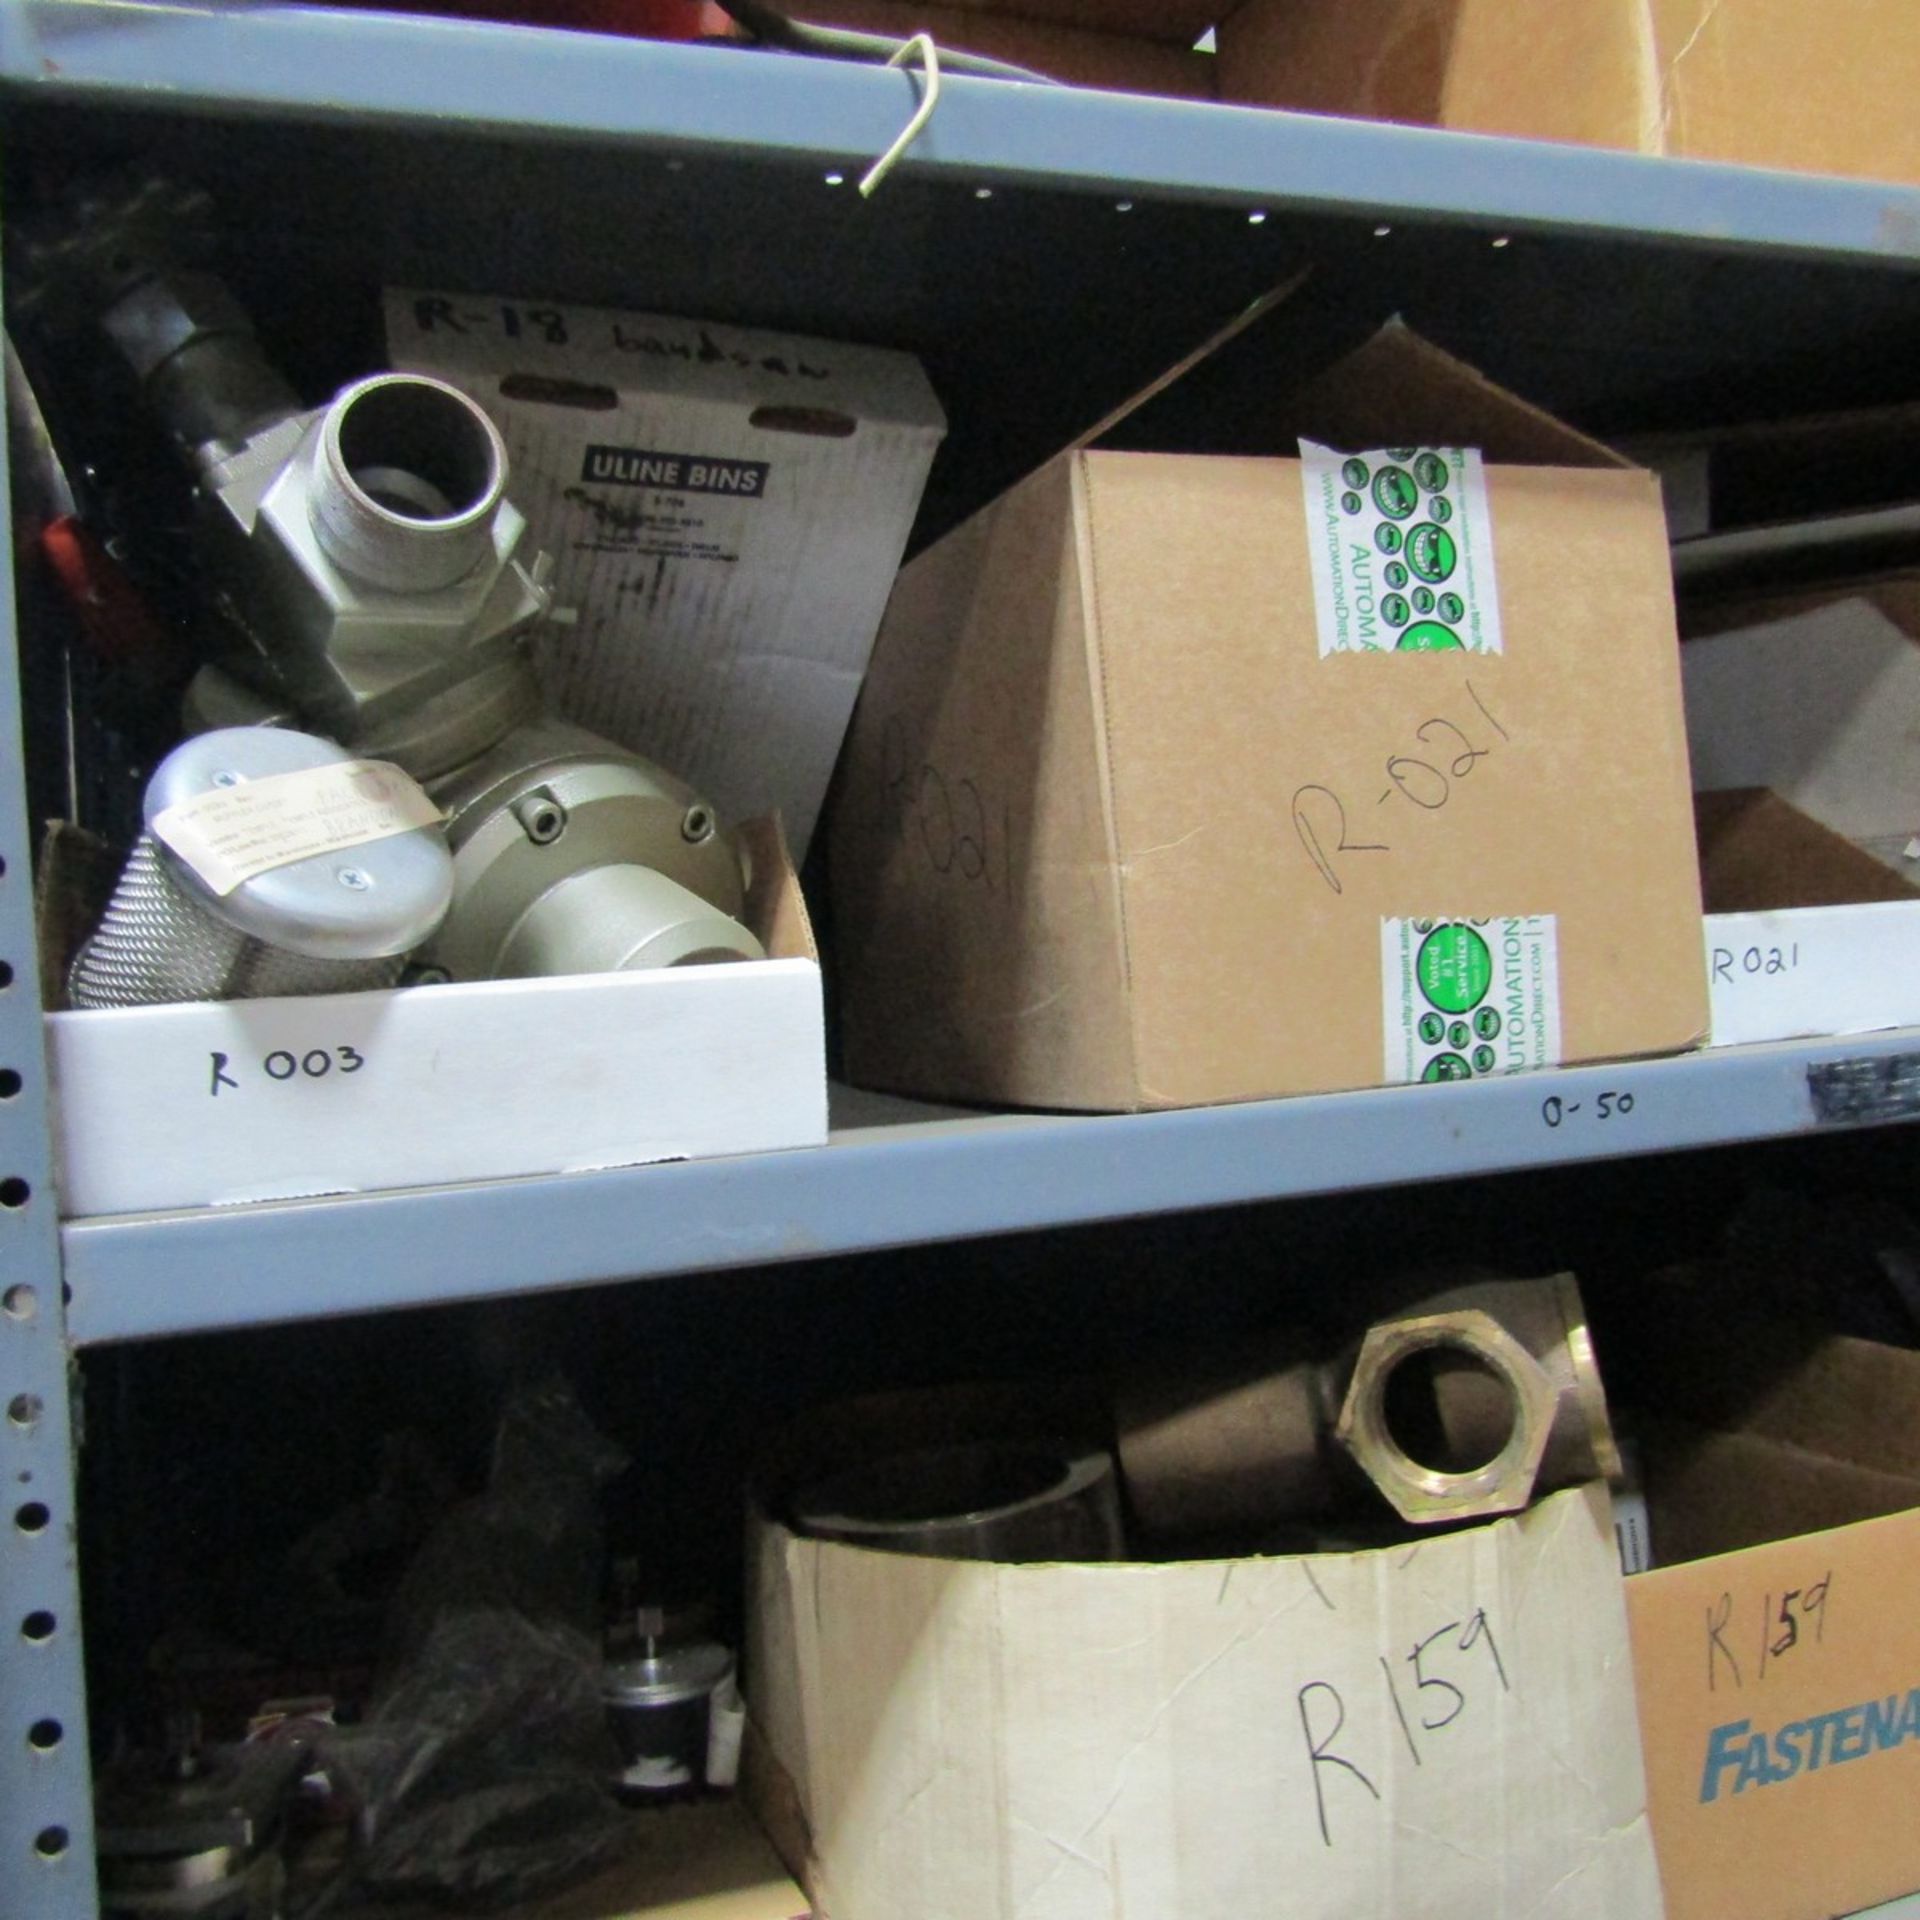 Shelving Units with Contents to Include 74" x 48", Pumps, Connectors, Plugs, Oil Filters, Fittings - Image 10 of 15